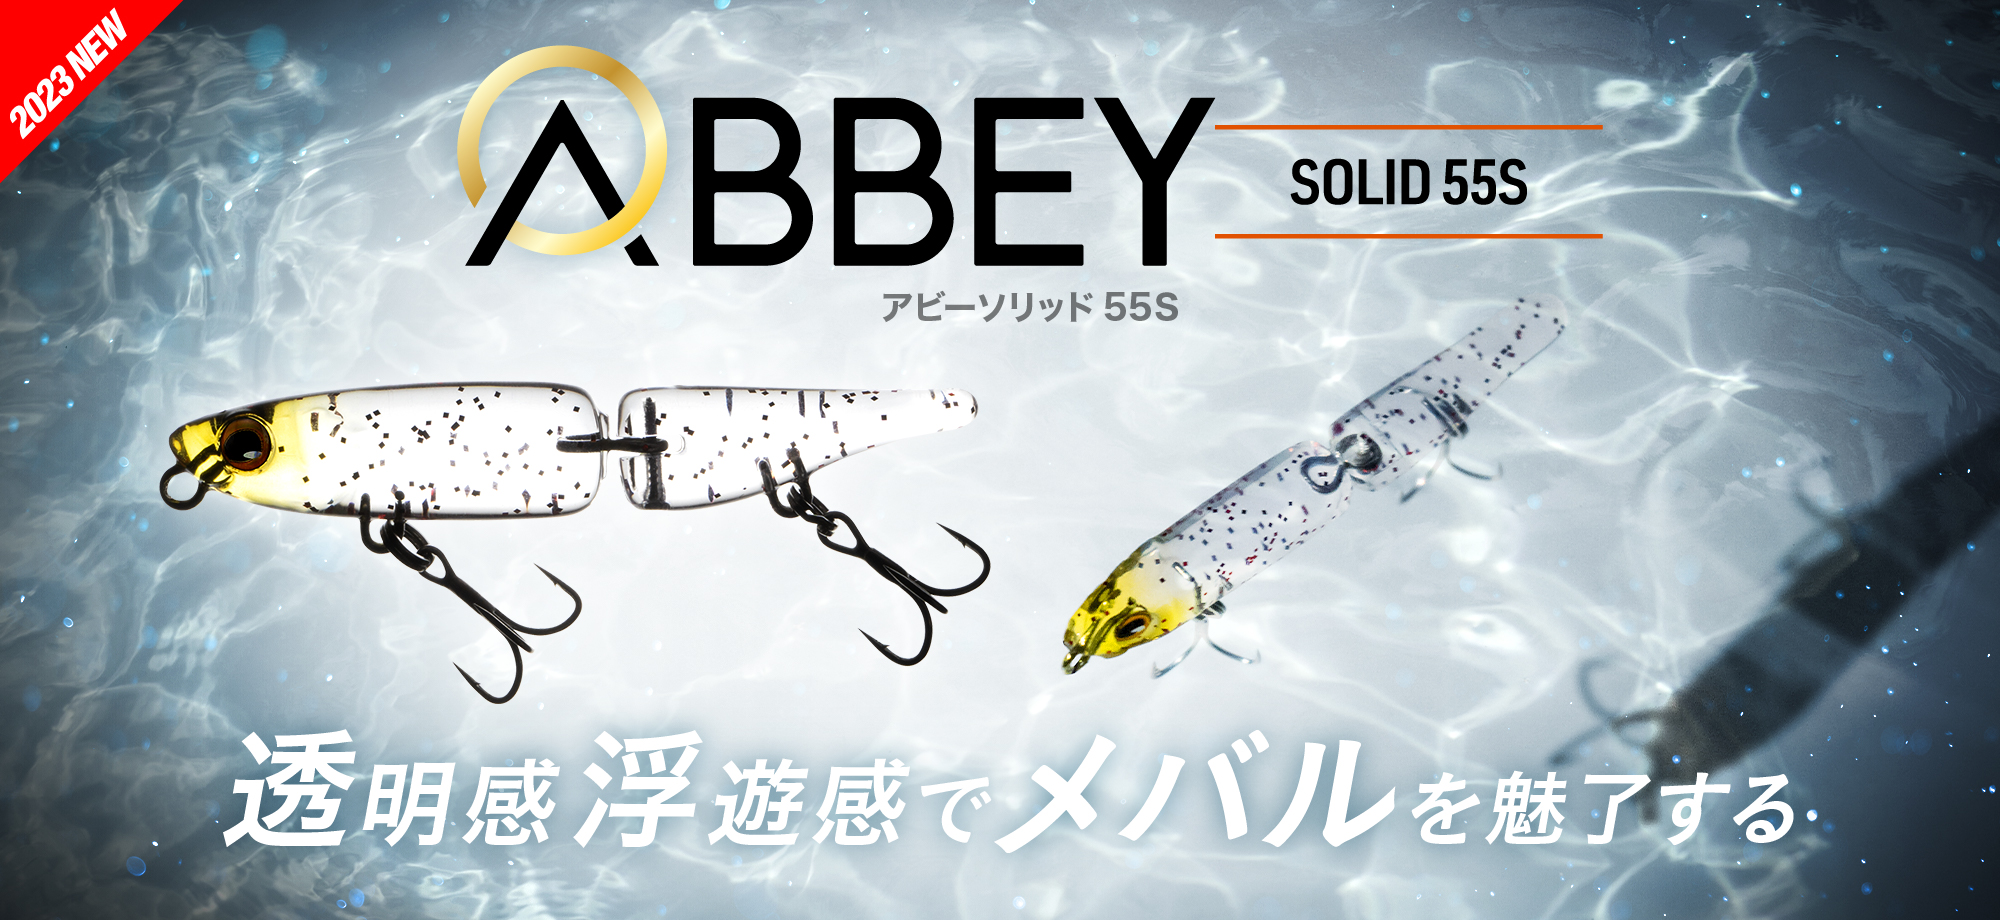 ABBEY SOLID 55S